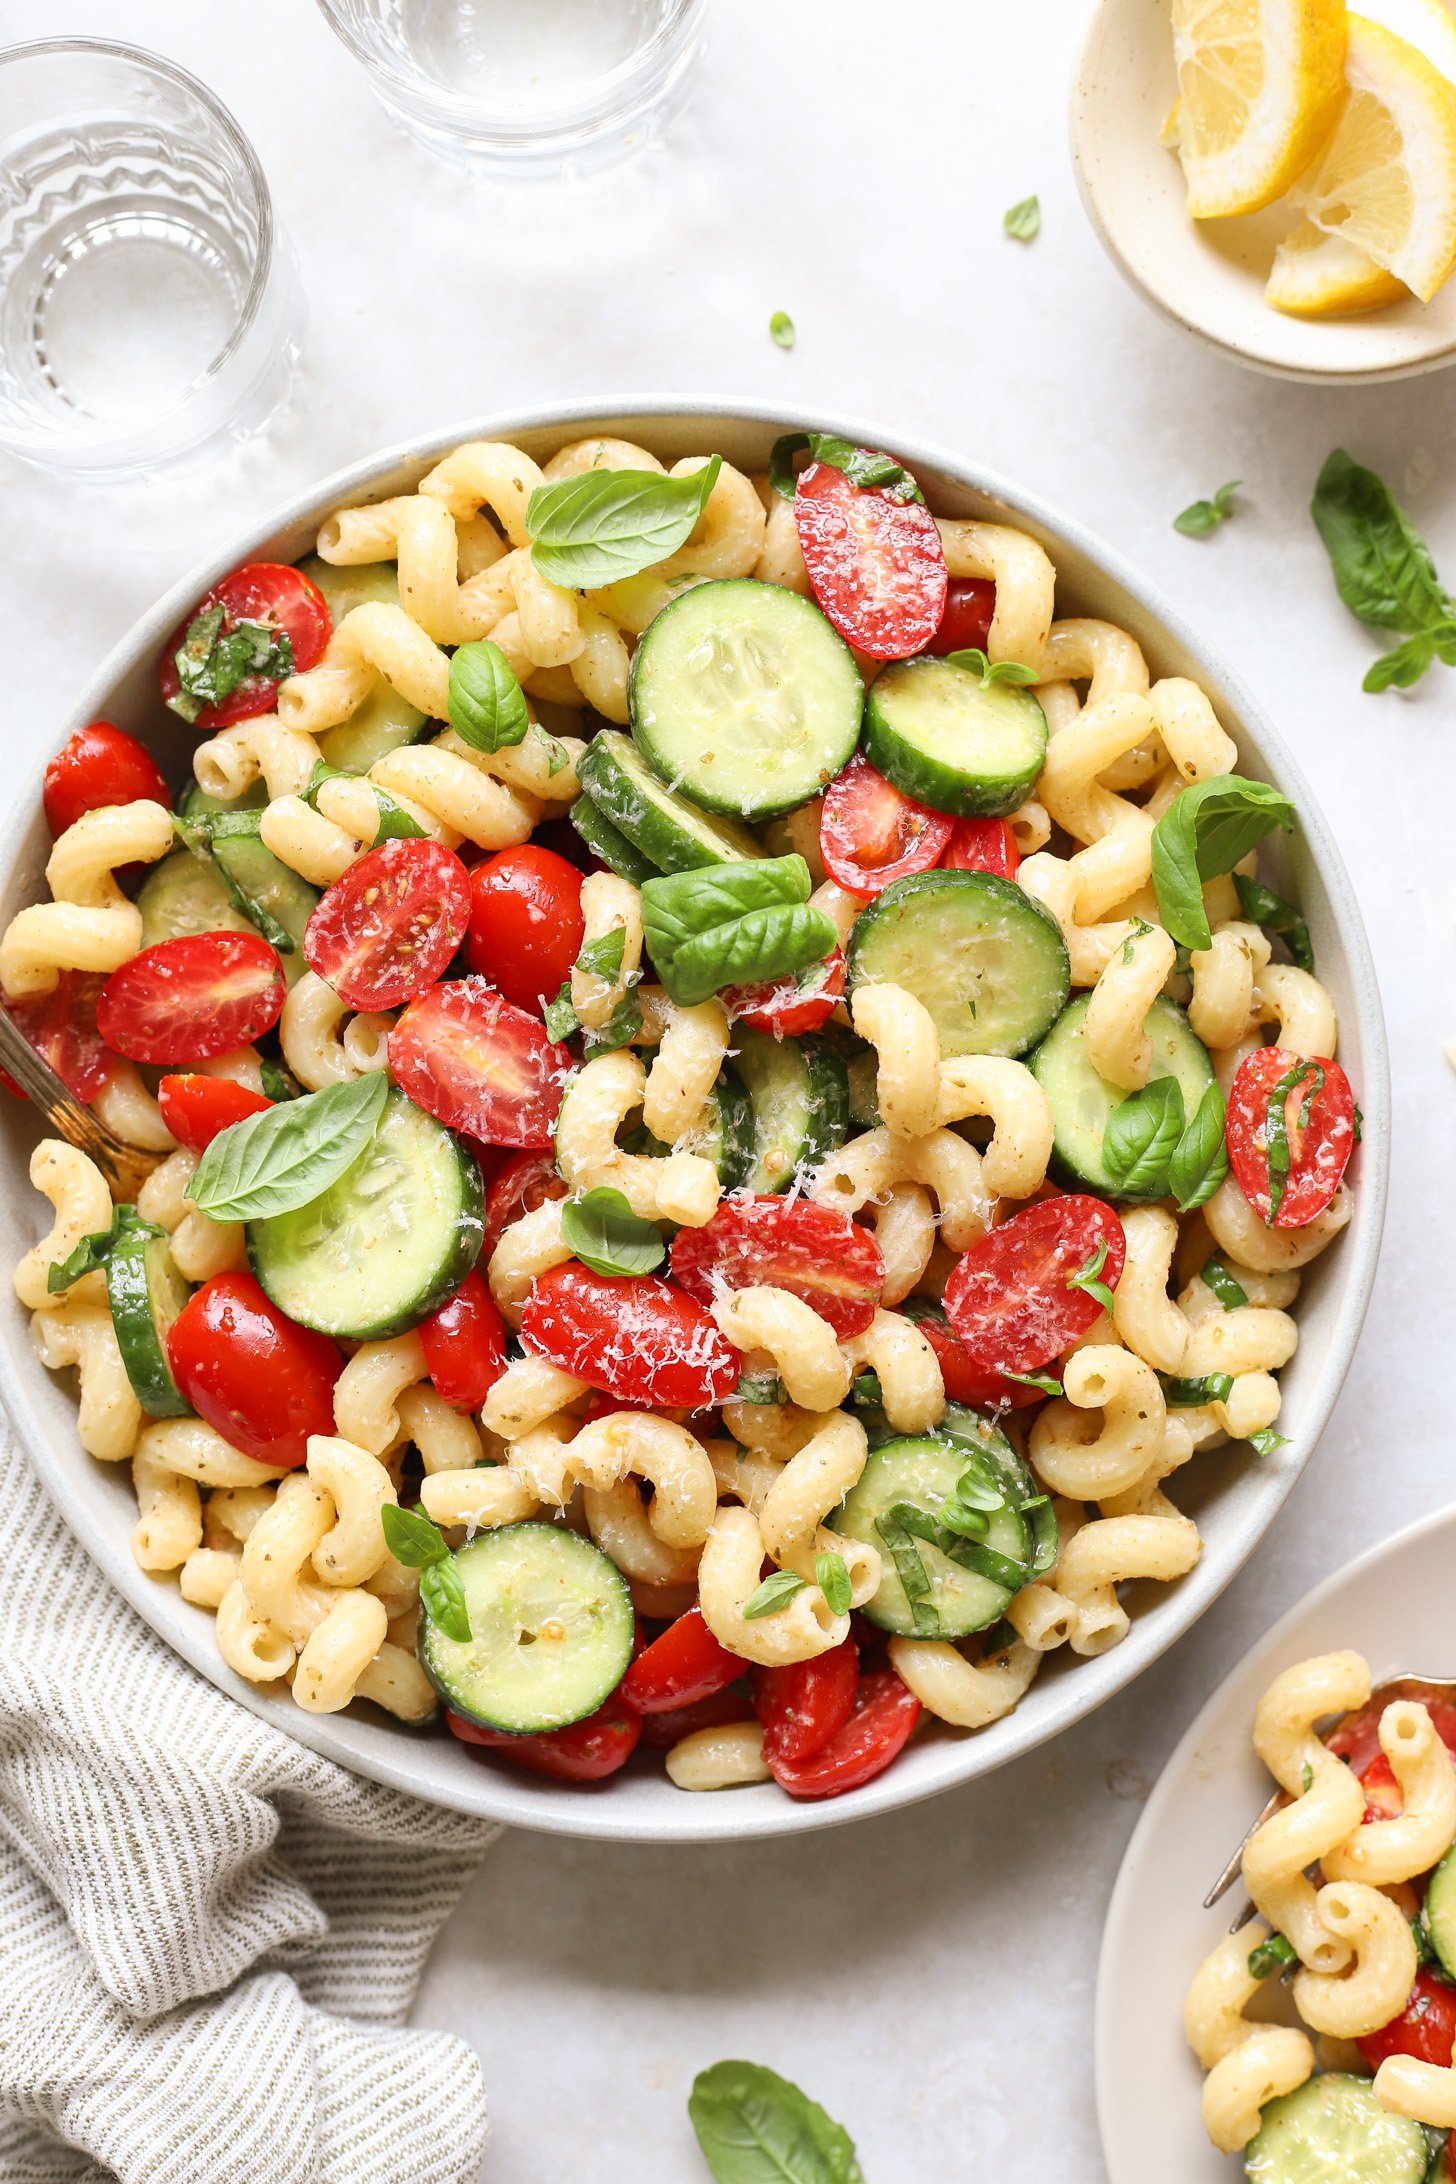 Cucumber Tomato pasta salad in a white bowl on a white table with two glasses of water, a bowl of sliced lemons and a striped napkin. There is a plate with a serving of pasta salad in the corner of the picture.